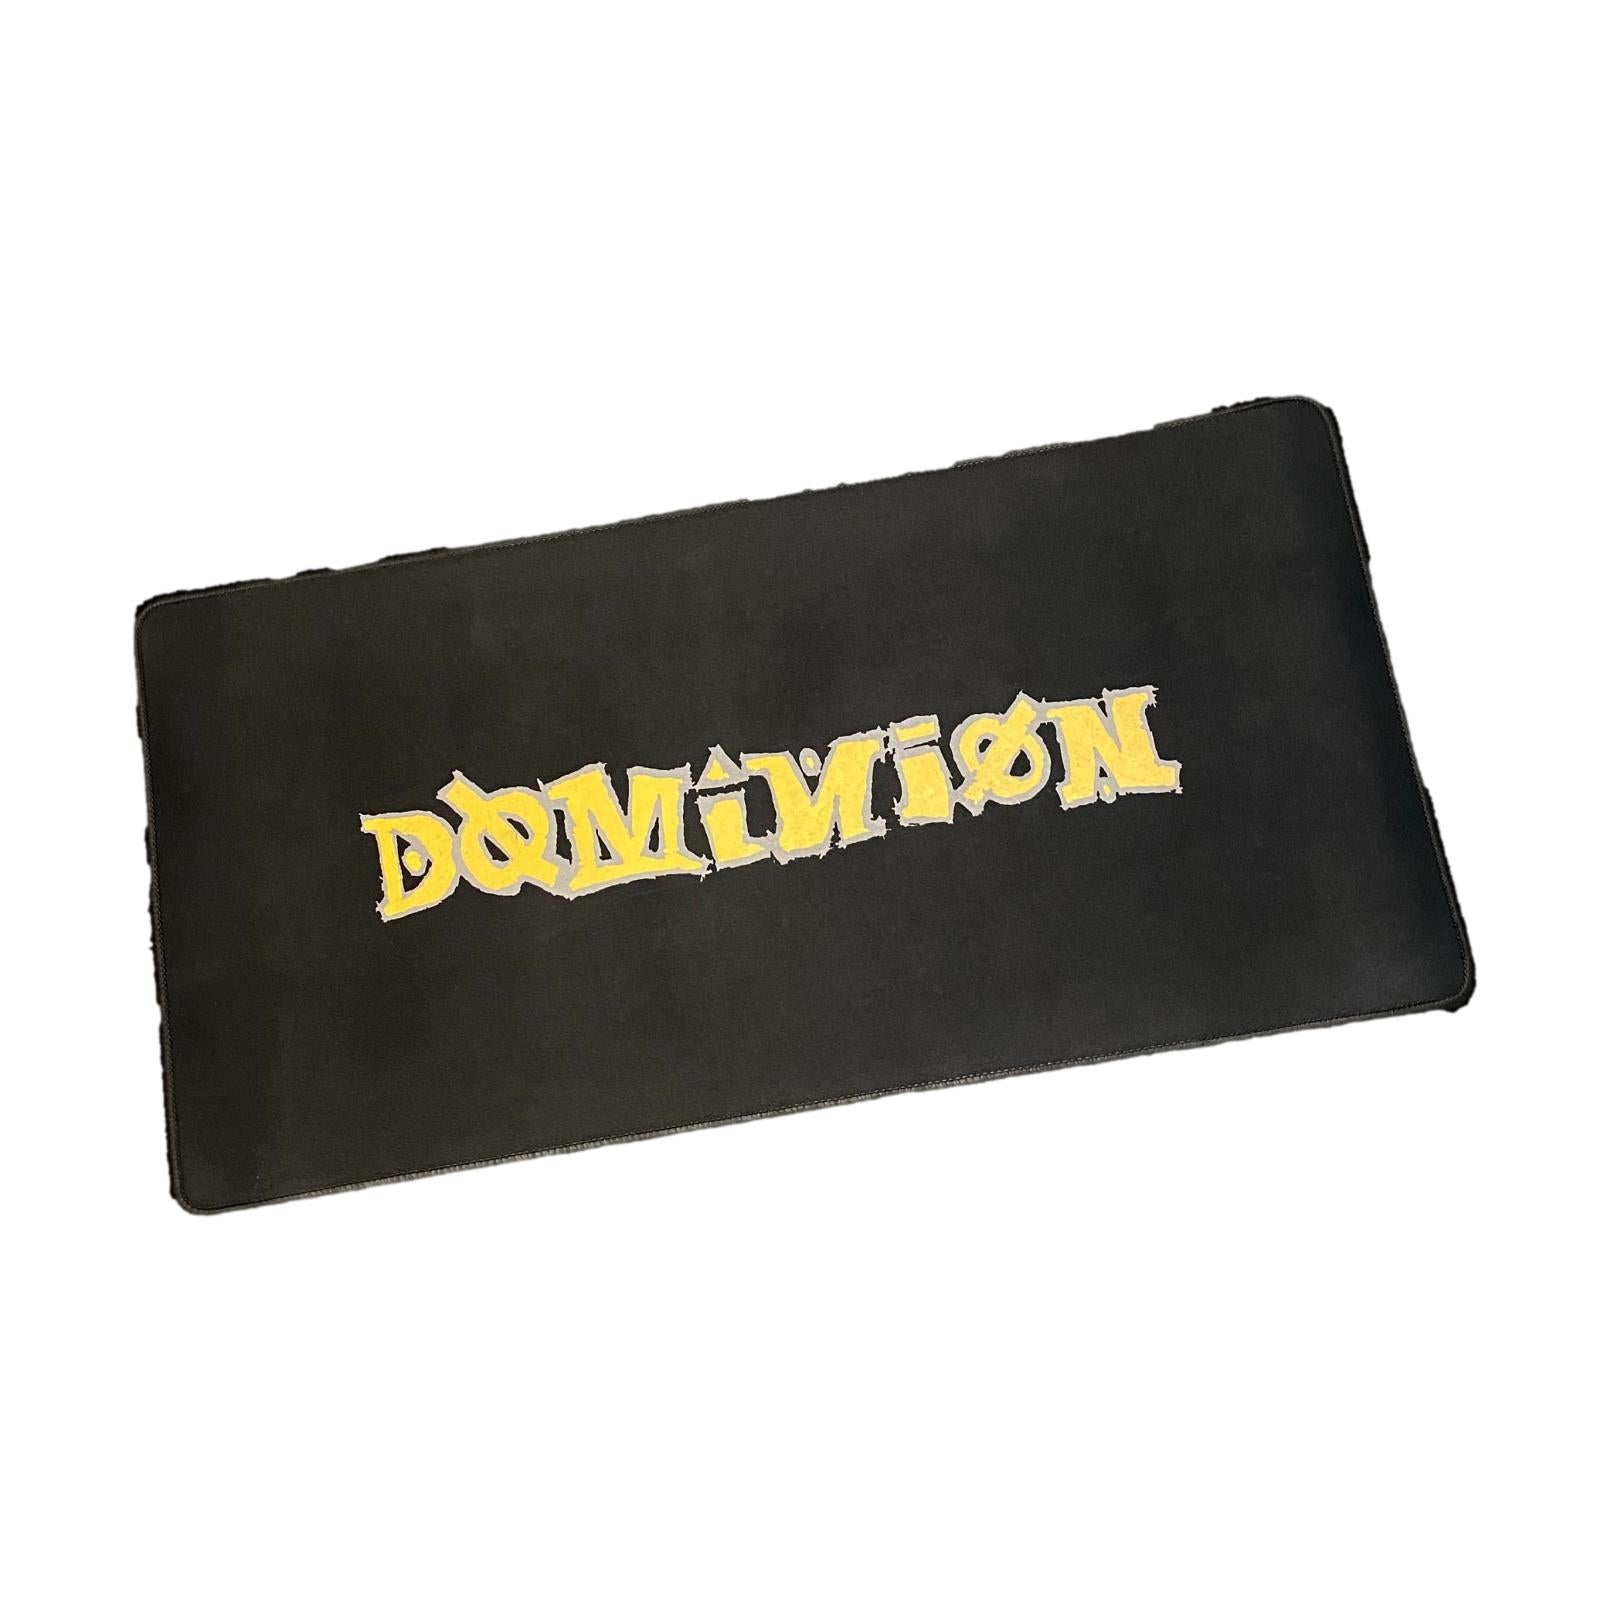 Venue Dominion Scratchy Logo Gaming Mouse Pad - Venue Skateboards